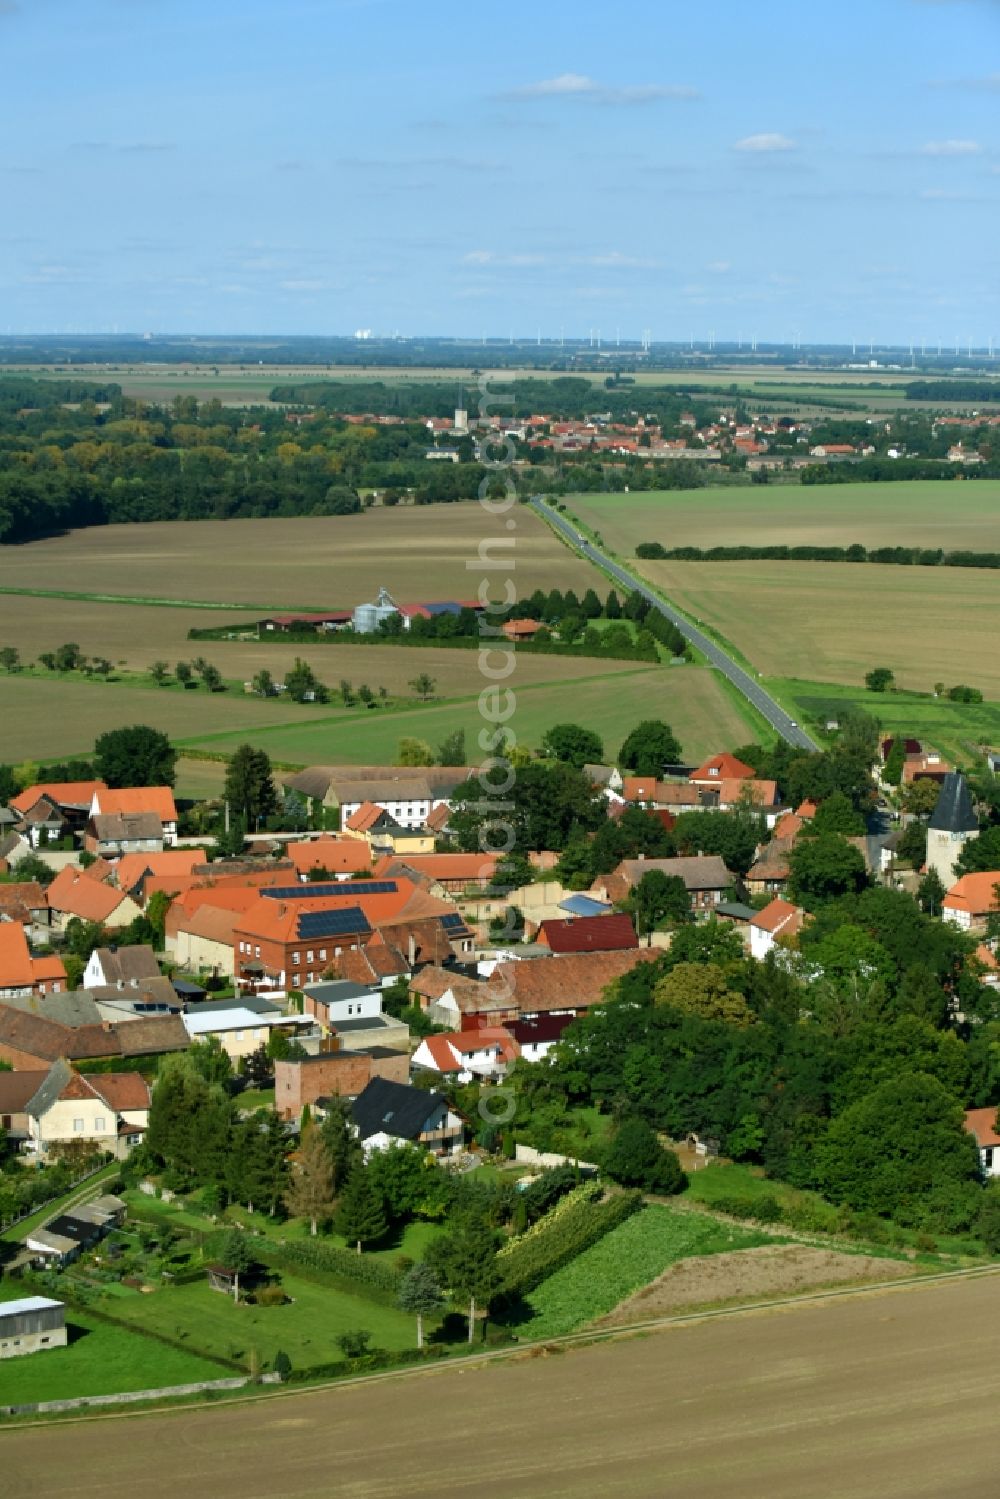 Aerial image Deesdorf - Village - view on the edge of agricultural fields and farmland in Deesdorf in the state Saxony-Anhalt, Germany